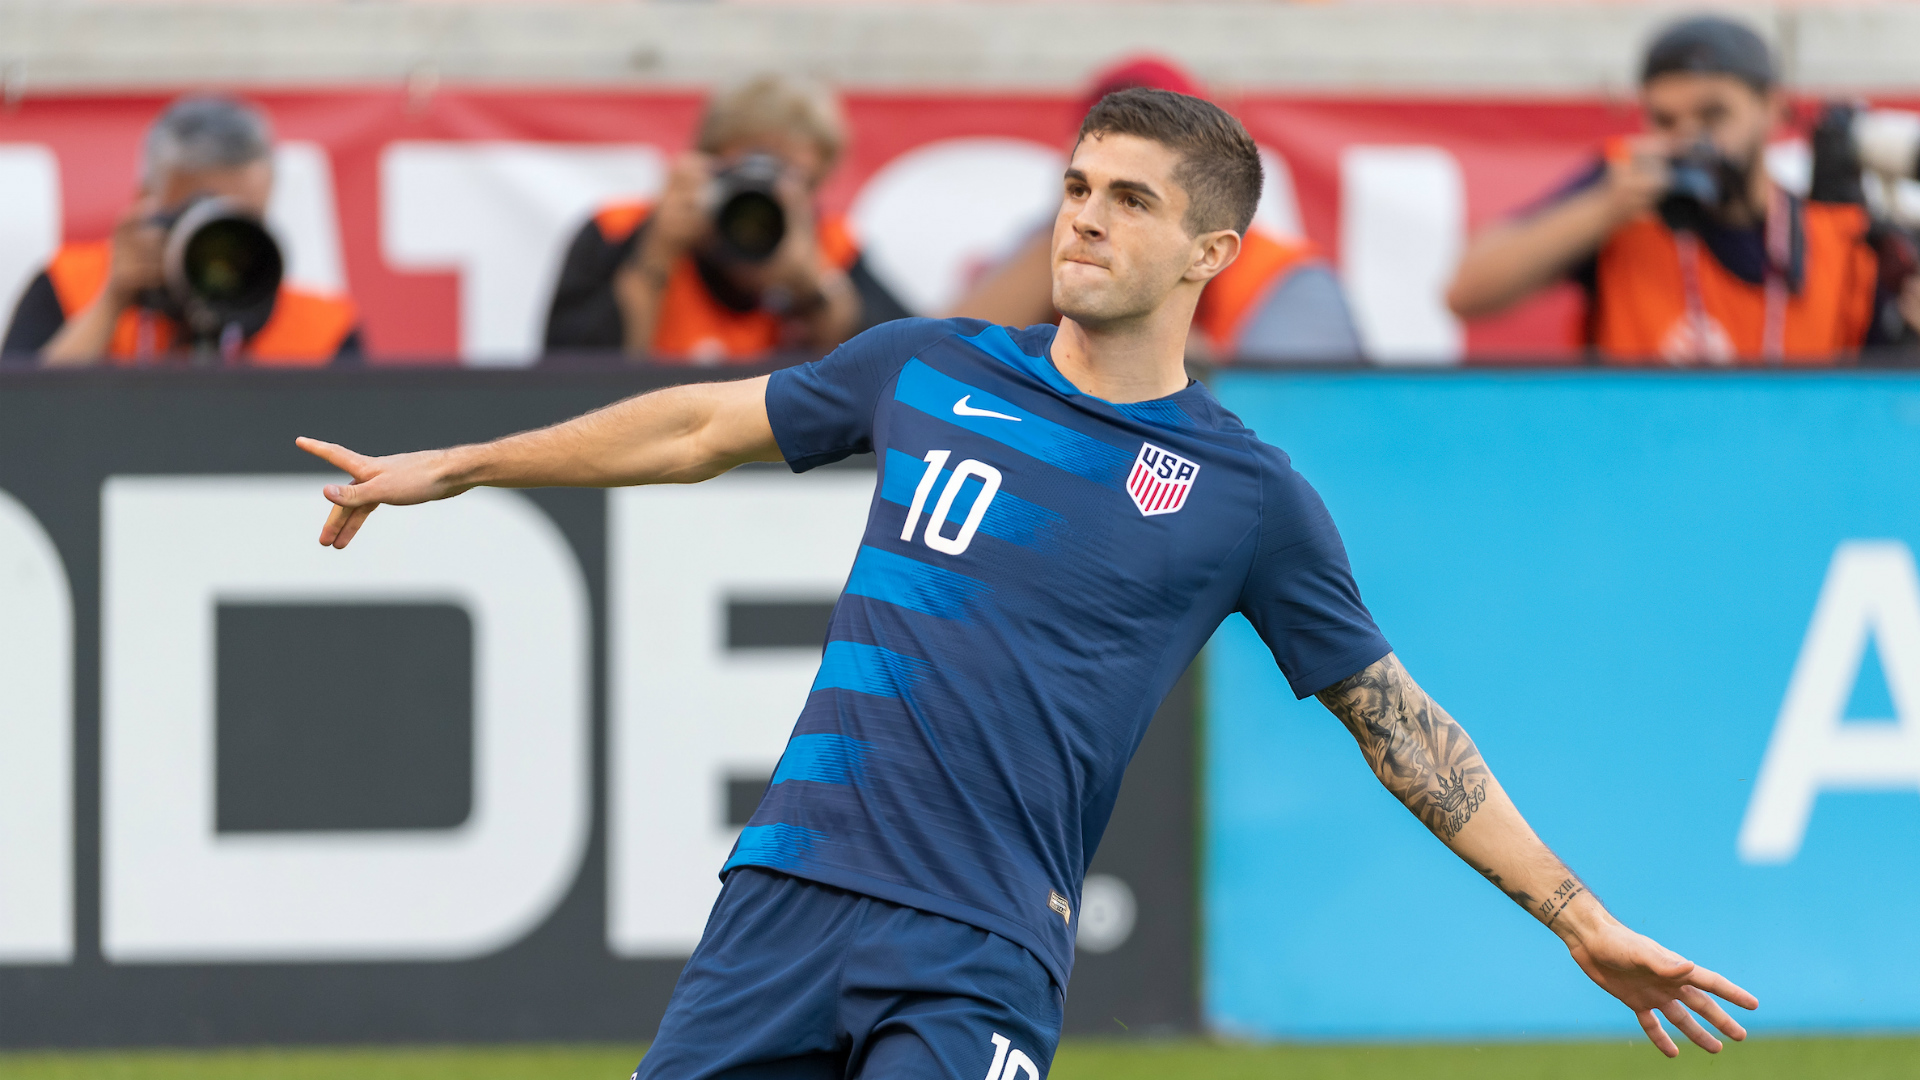 USMNT news: Gold Cup marks first tournament with Christian Pulisic as